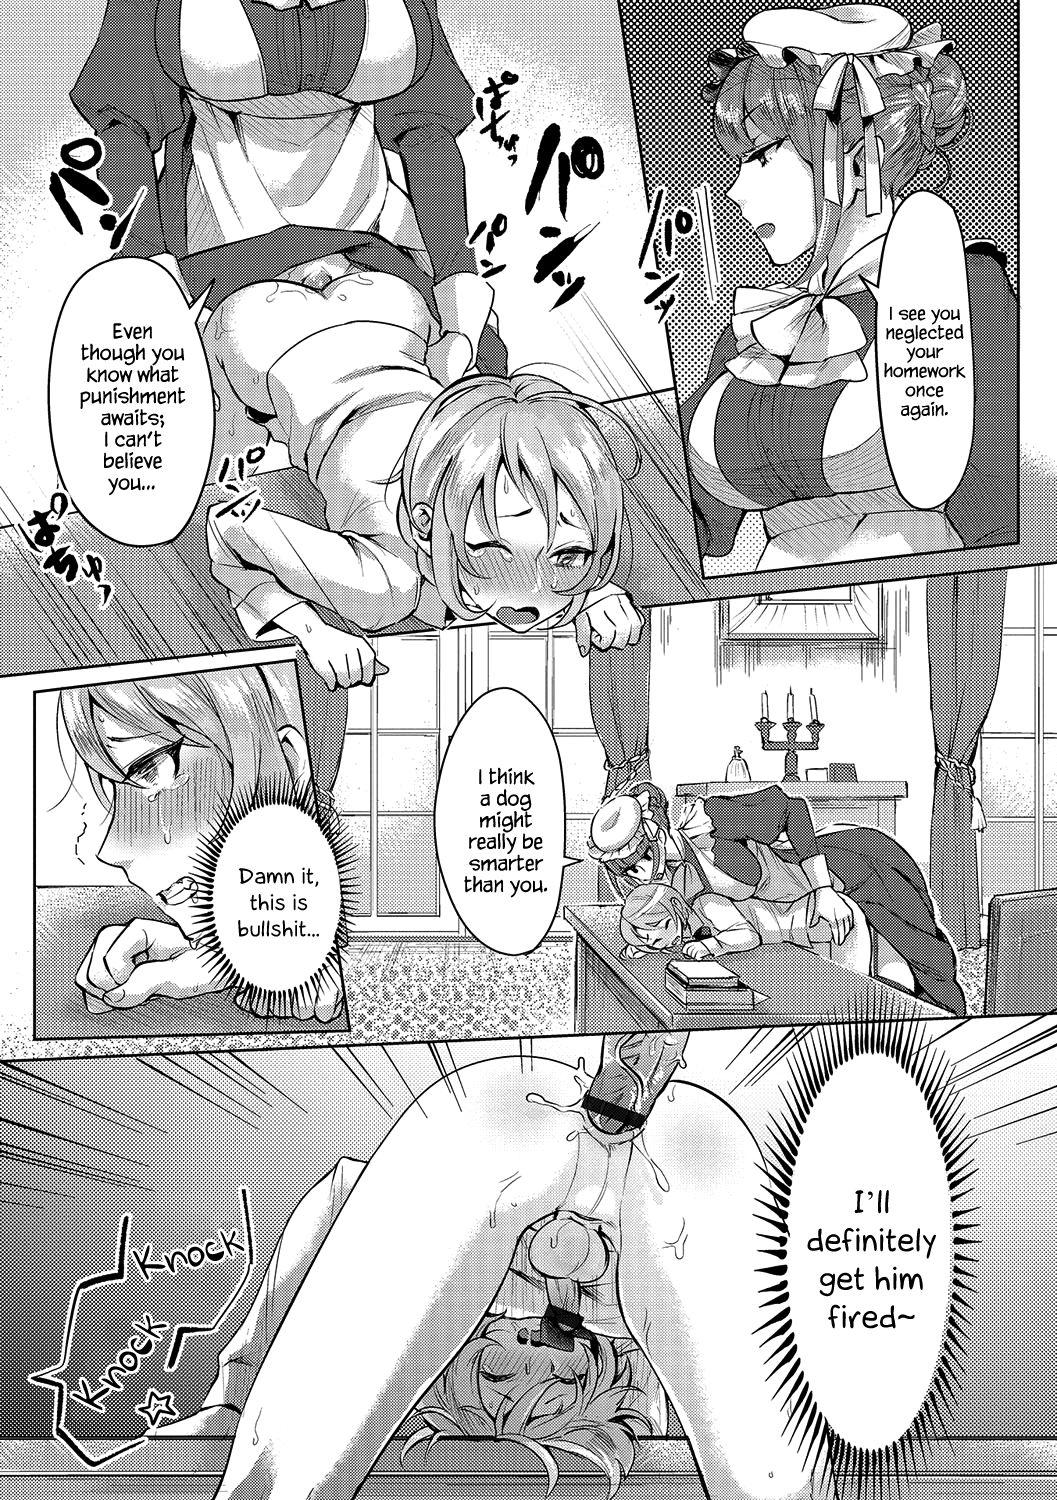 Bocchama no Aibou Maid | The Young Master’s Partner Maid 10